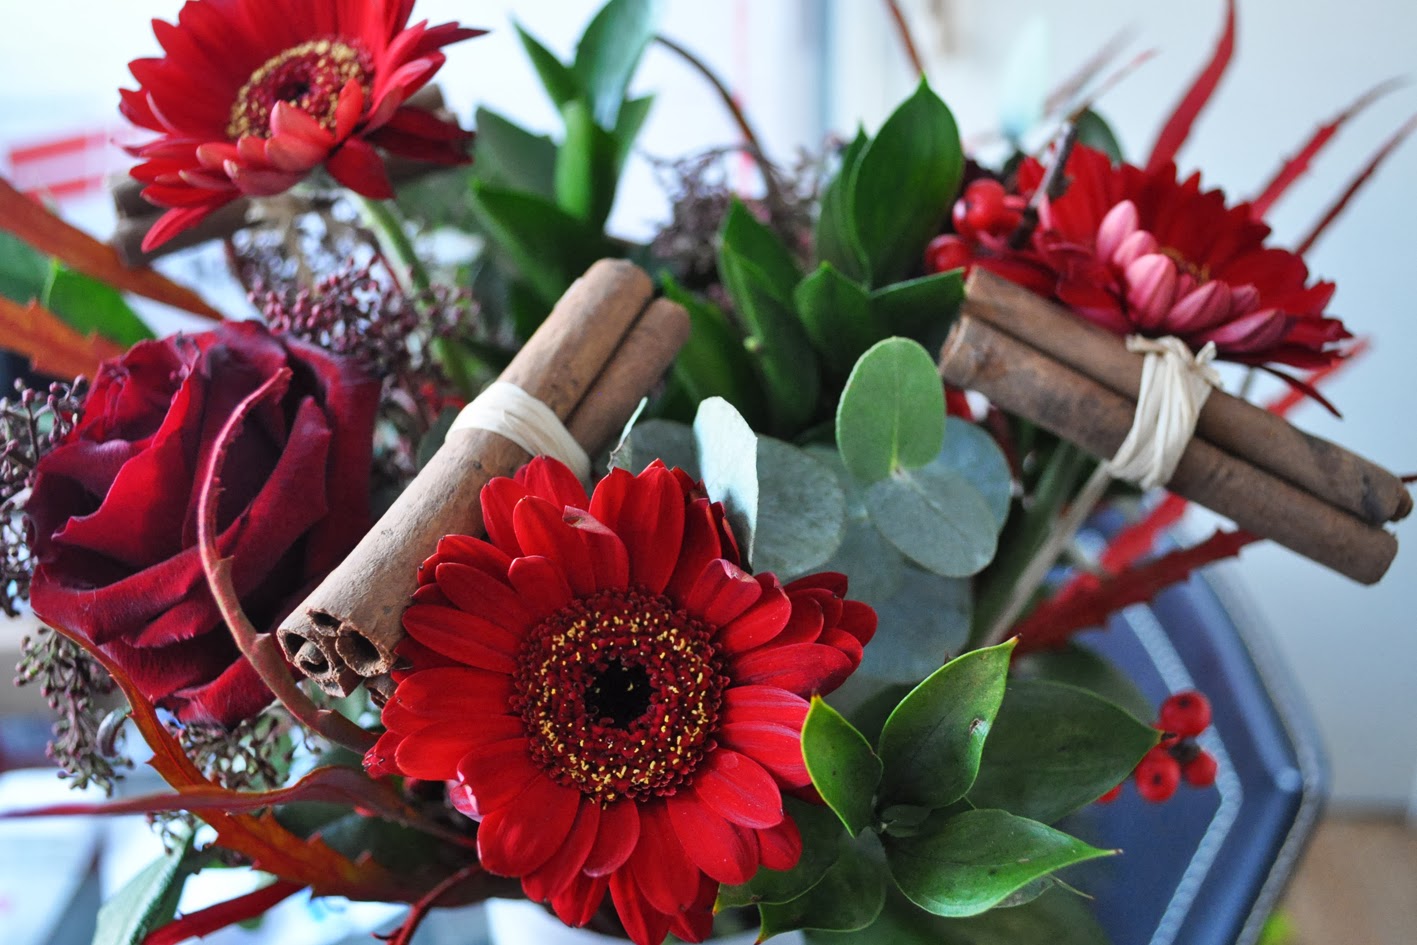 ... , beauty and lifestyle blog.: Review: Debenhams Christmas Flowers